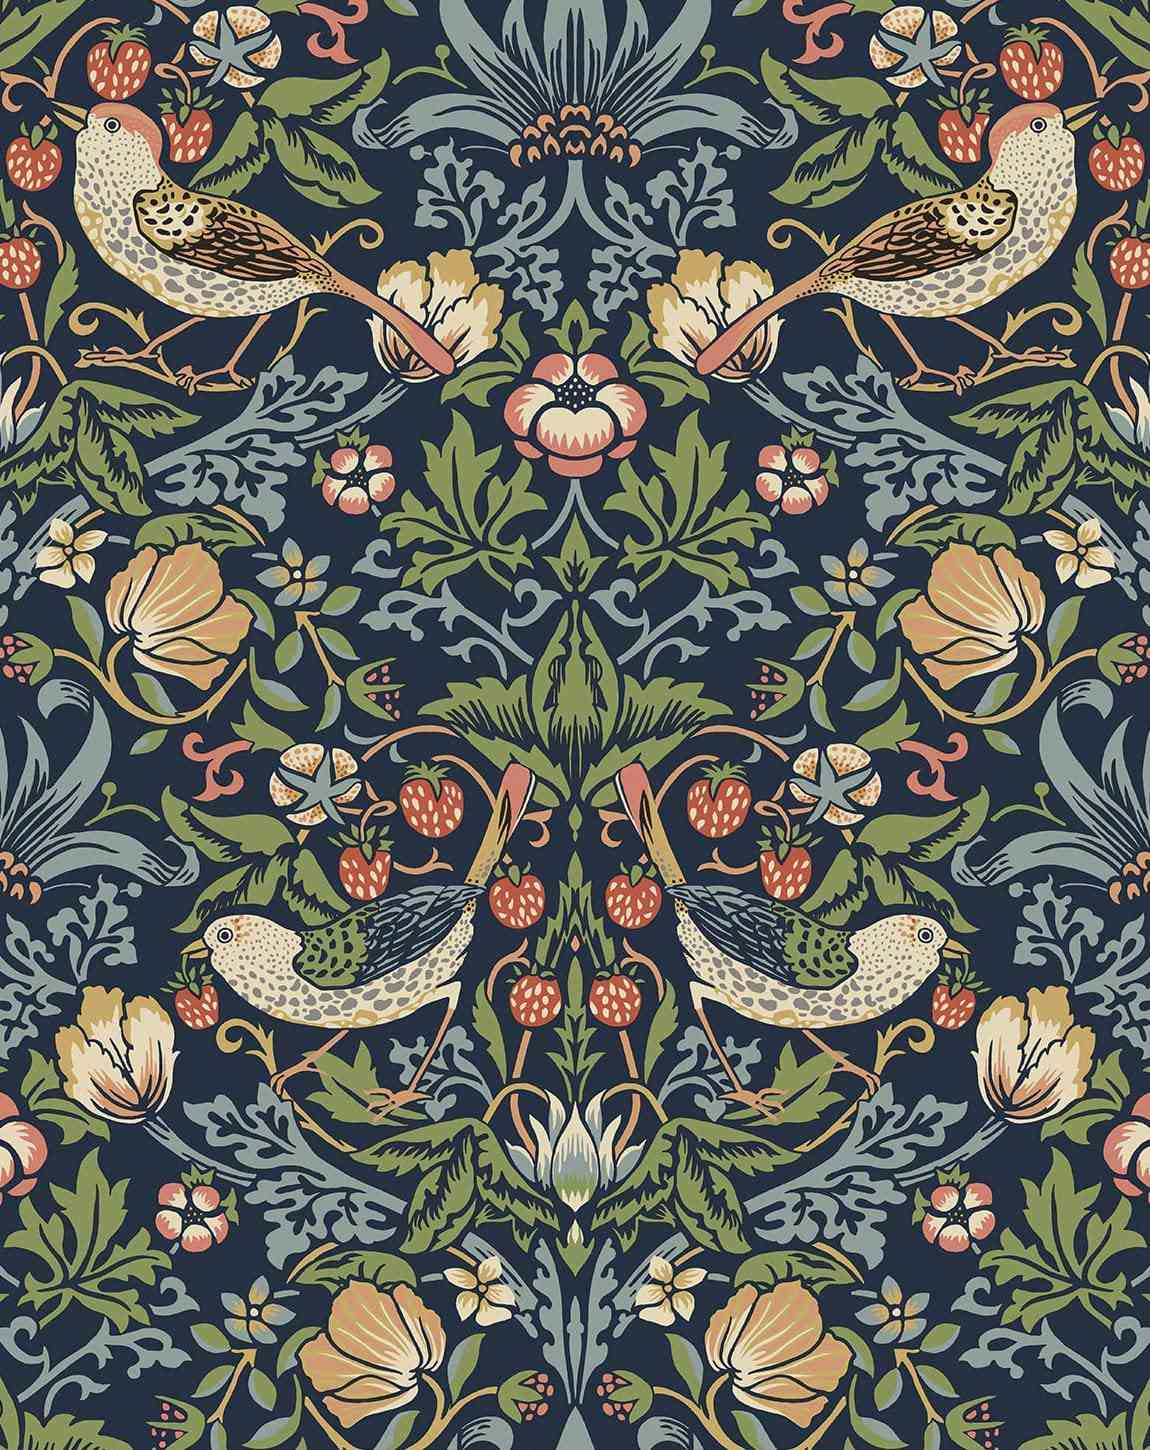 Williams Morris Floral Wallpaper in Blues and Greens